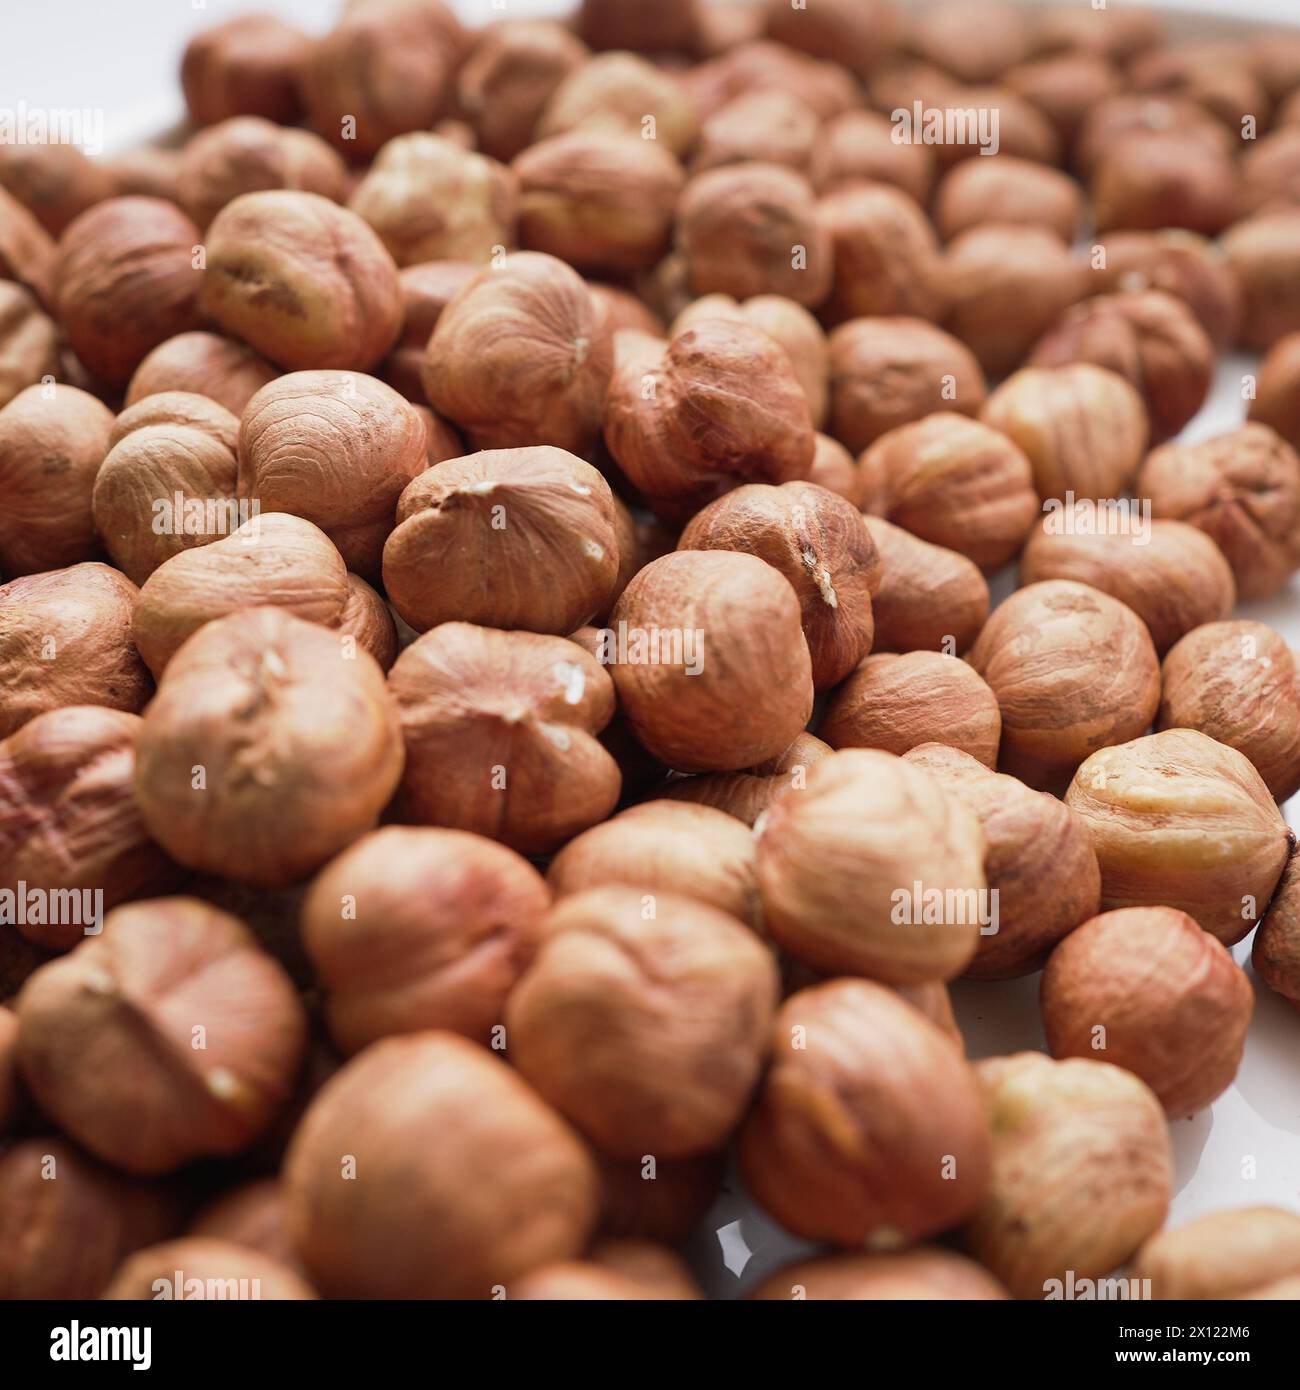 A close-up view of a pile of hazelnuts, showcasing their rich texture and warm, brown tones, perfect for culinary themes Stock Photo